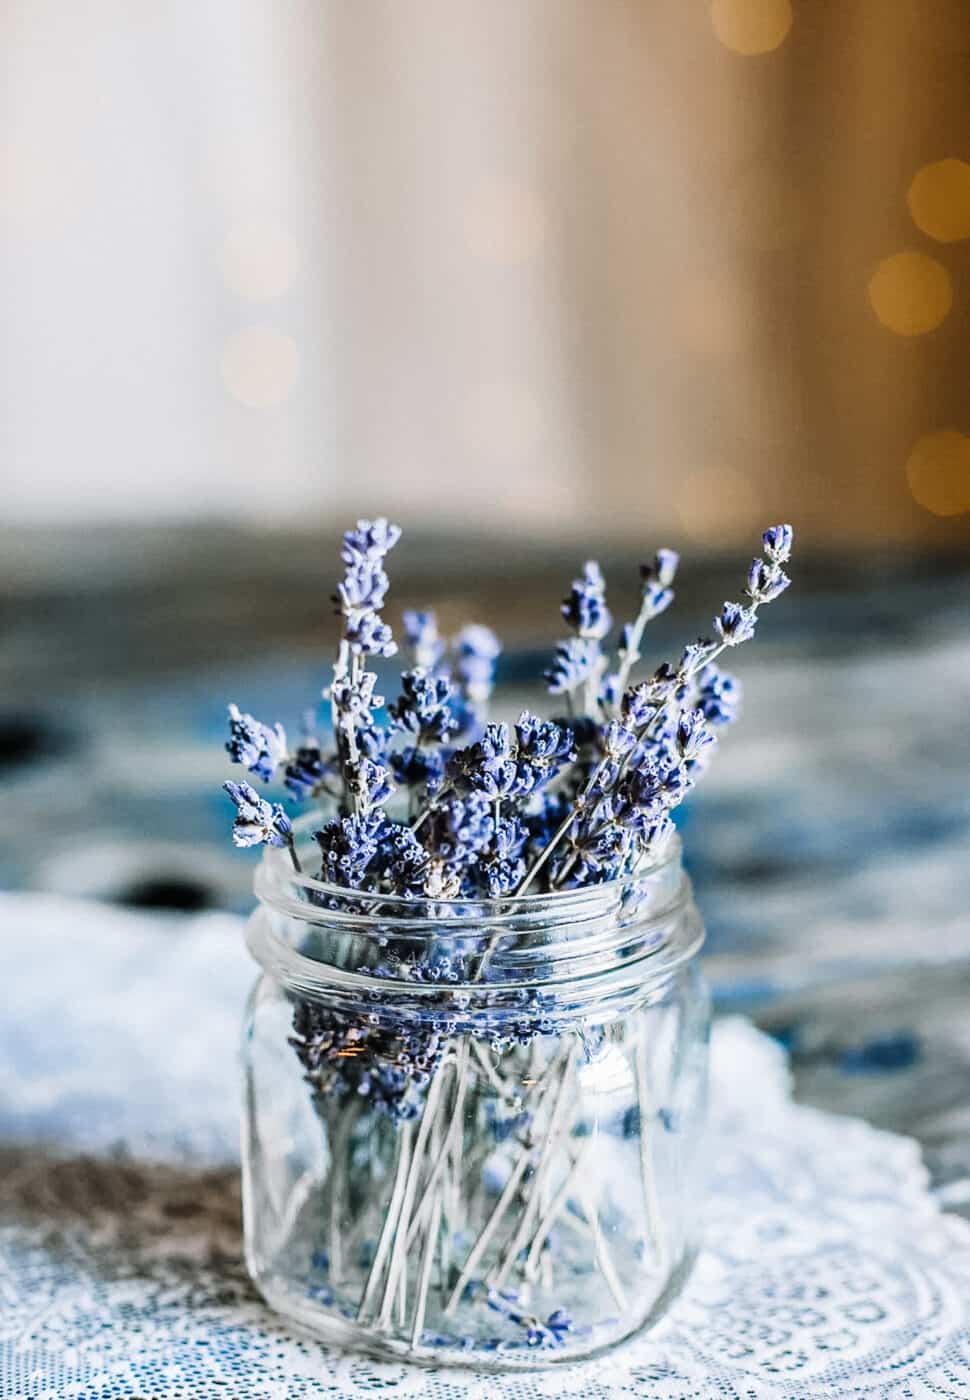 One bedroom must have we often recommend is plants! Adding a plant like lavender to your room has been proven to improve sleep - just keep out of reach of pets!